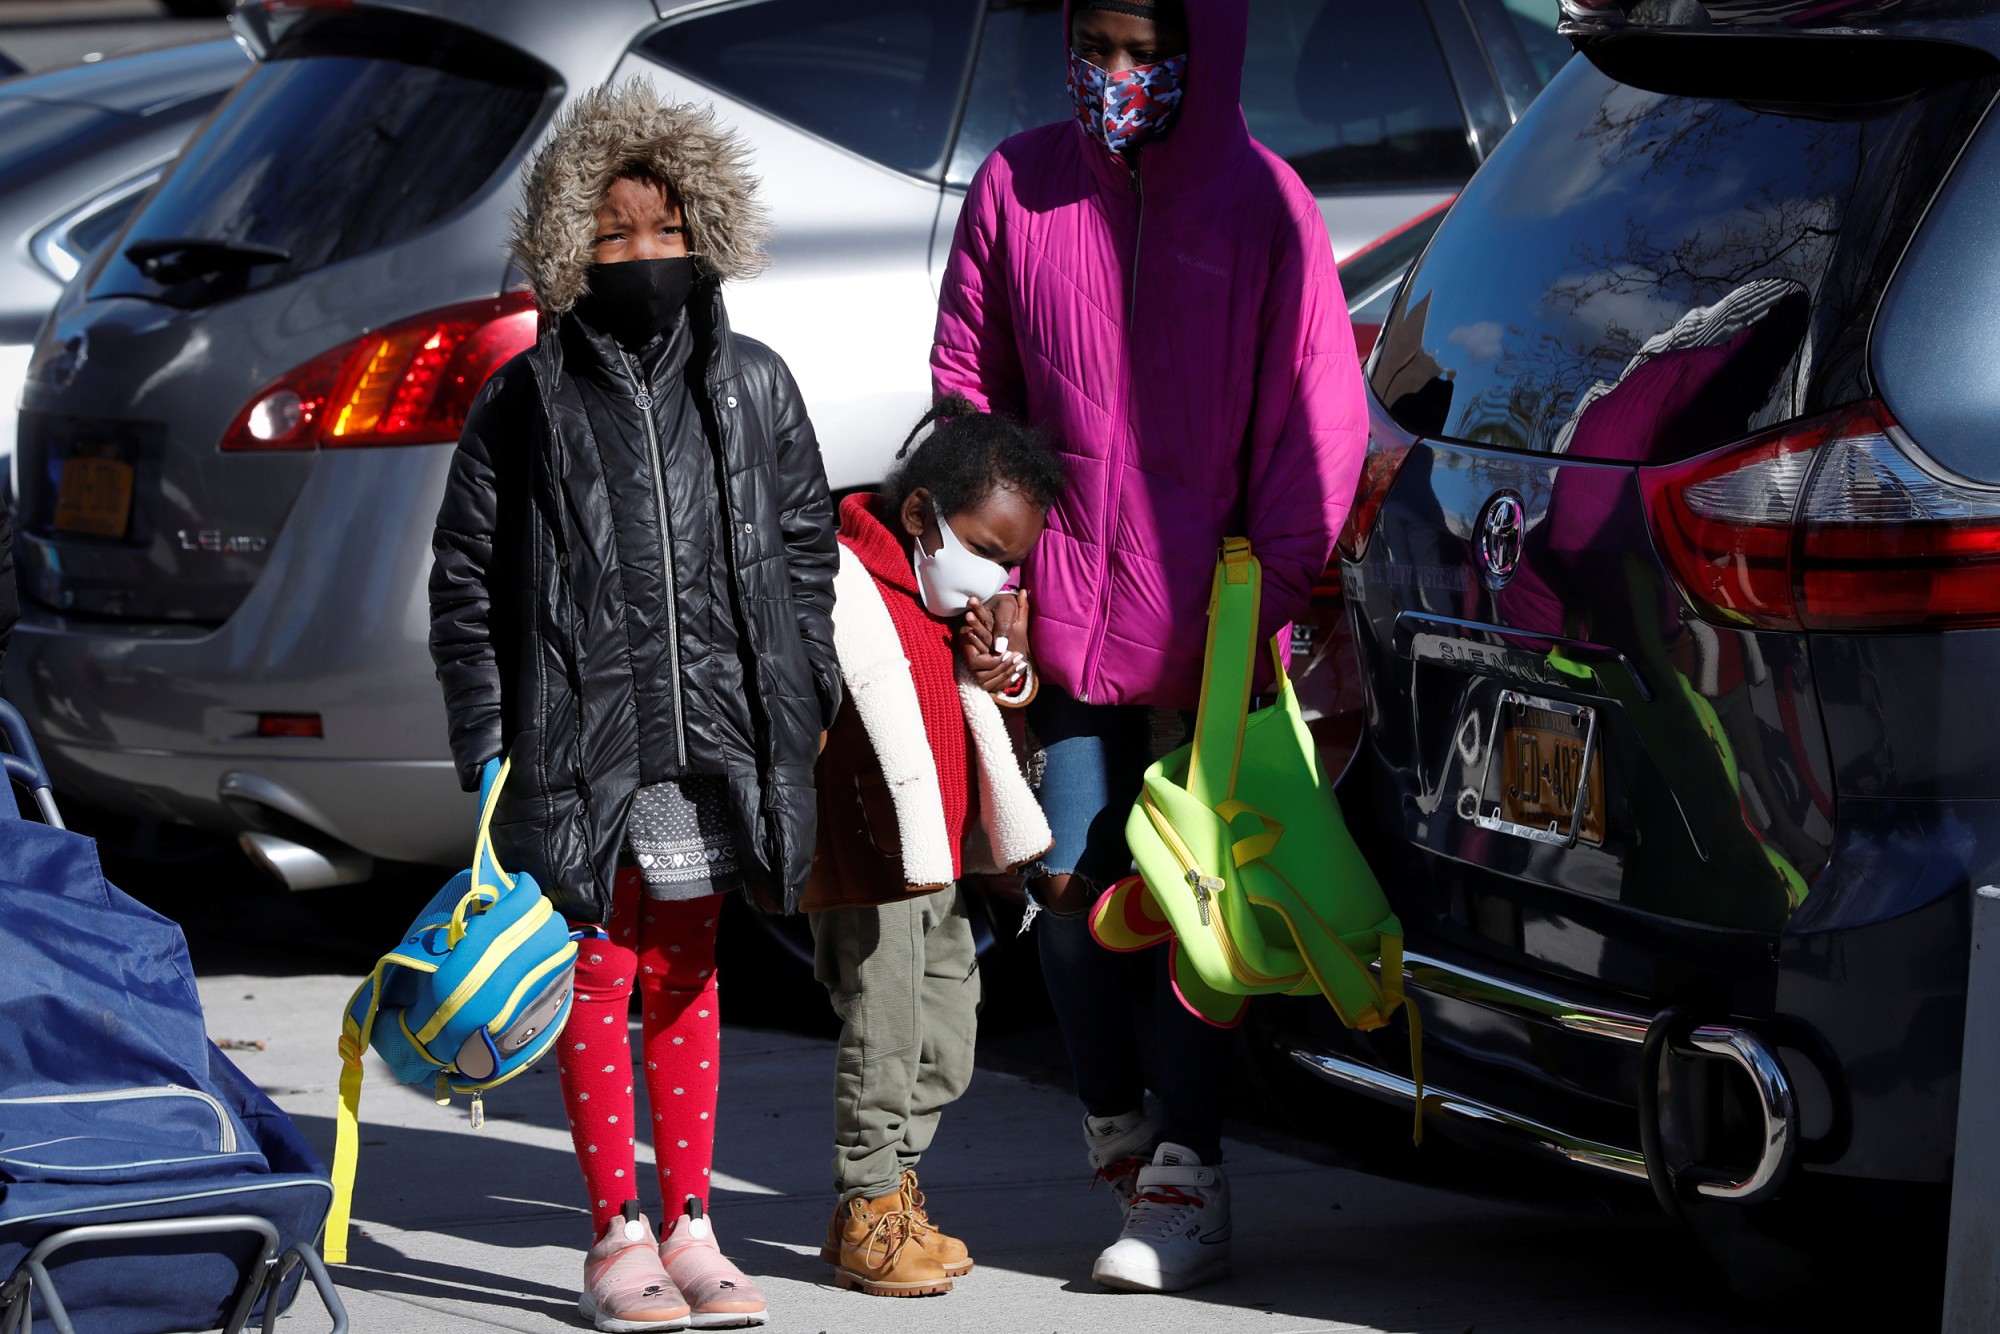 Children wait in line to pick up packages of free food during a food rescue operation run by City Harvest during the outbreak of the coronavirus in the Bronx, N.Y. on April 22, 2020.Mike Segar / Reuters